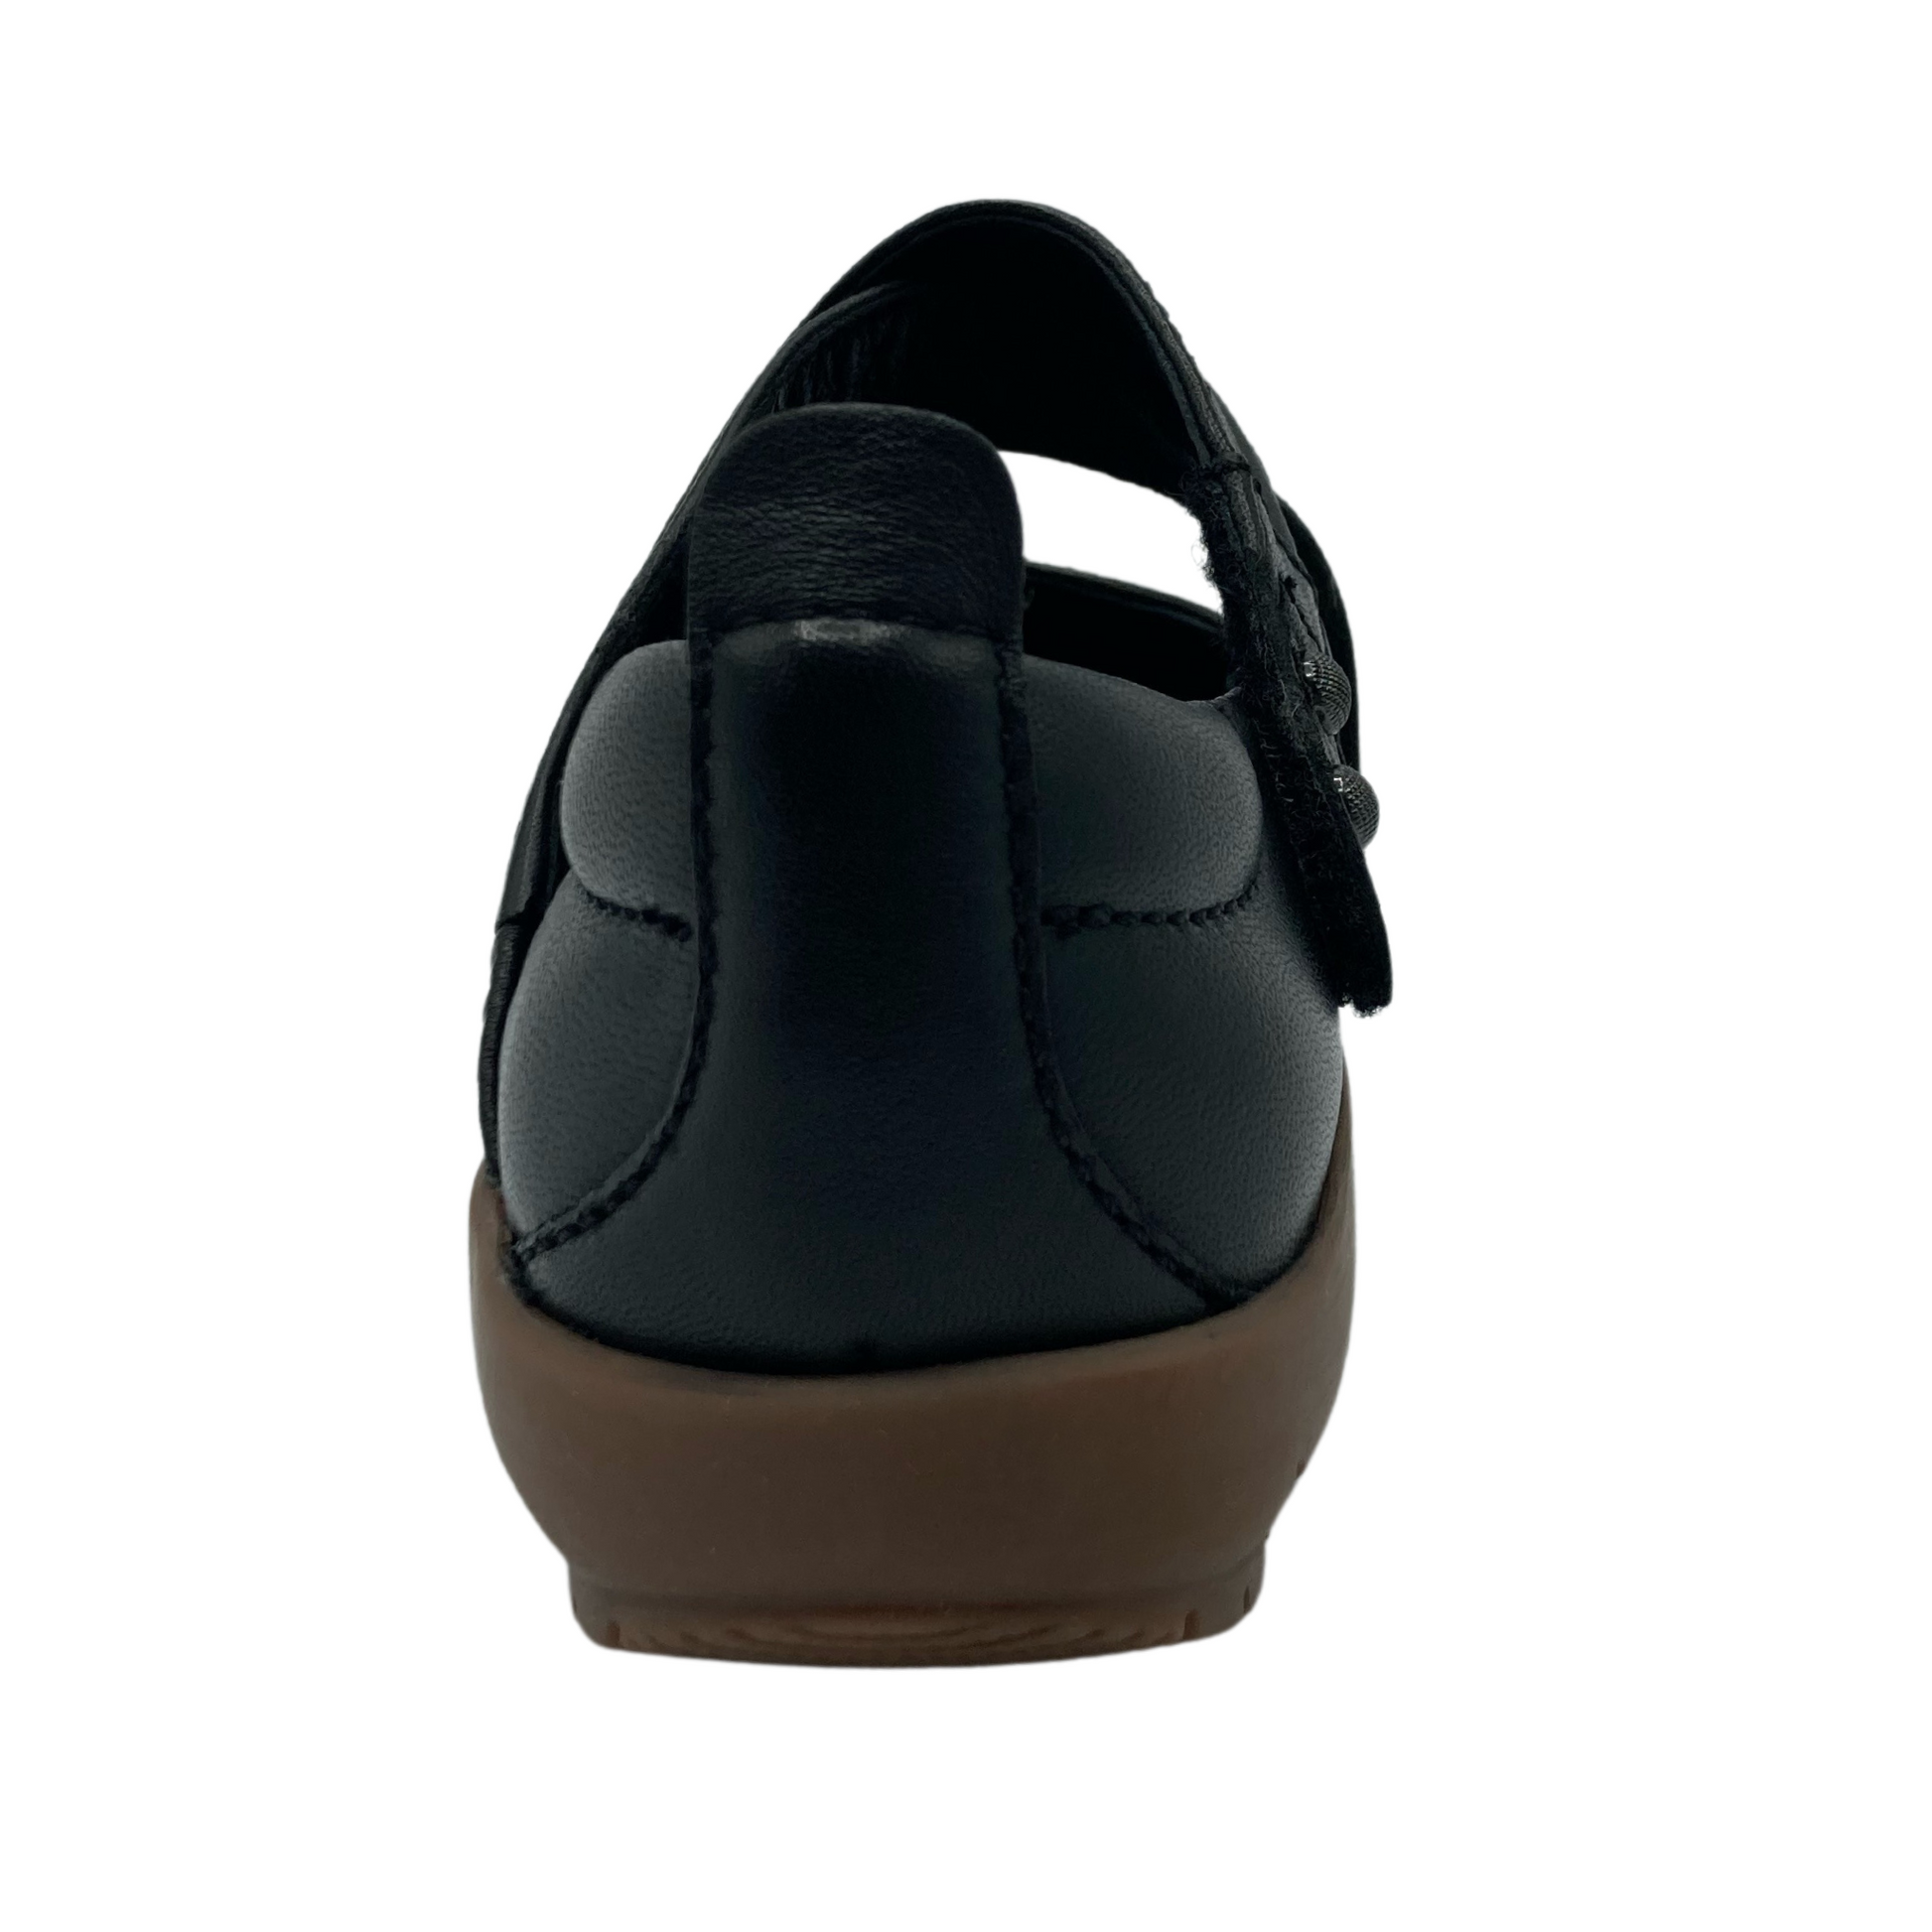 Back view of black leather mary jane shoe with brown rubber outsole